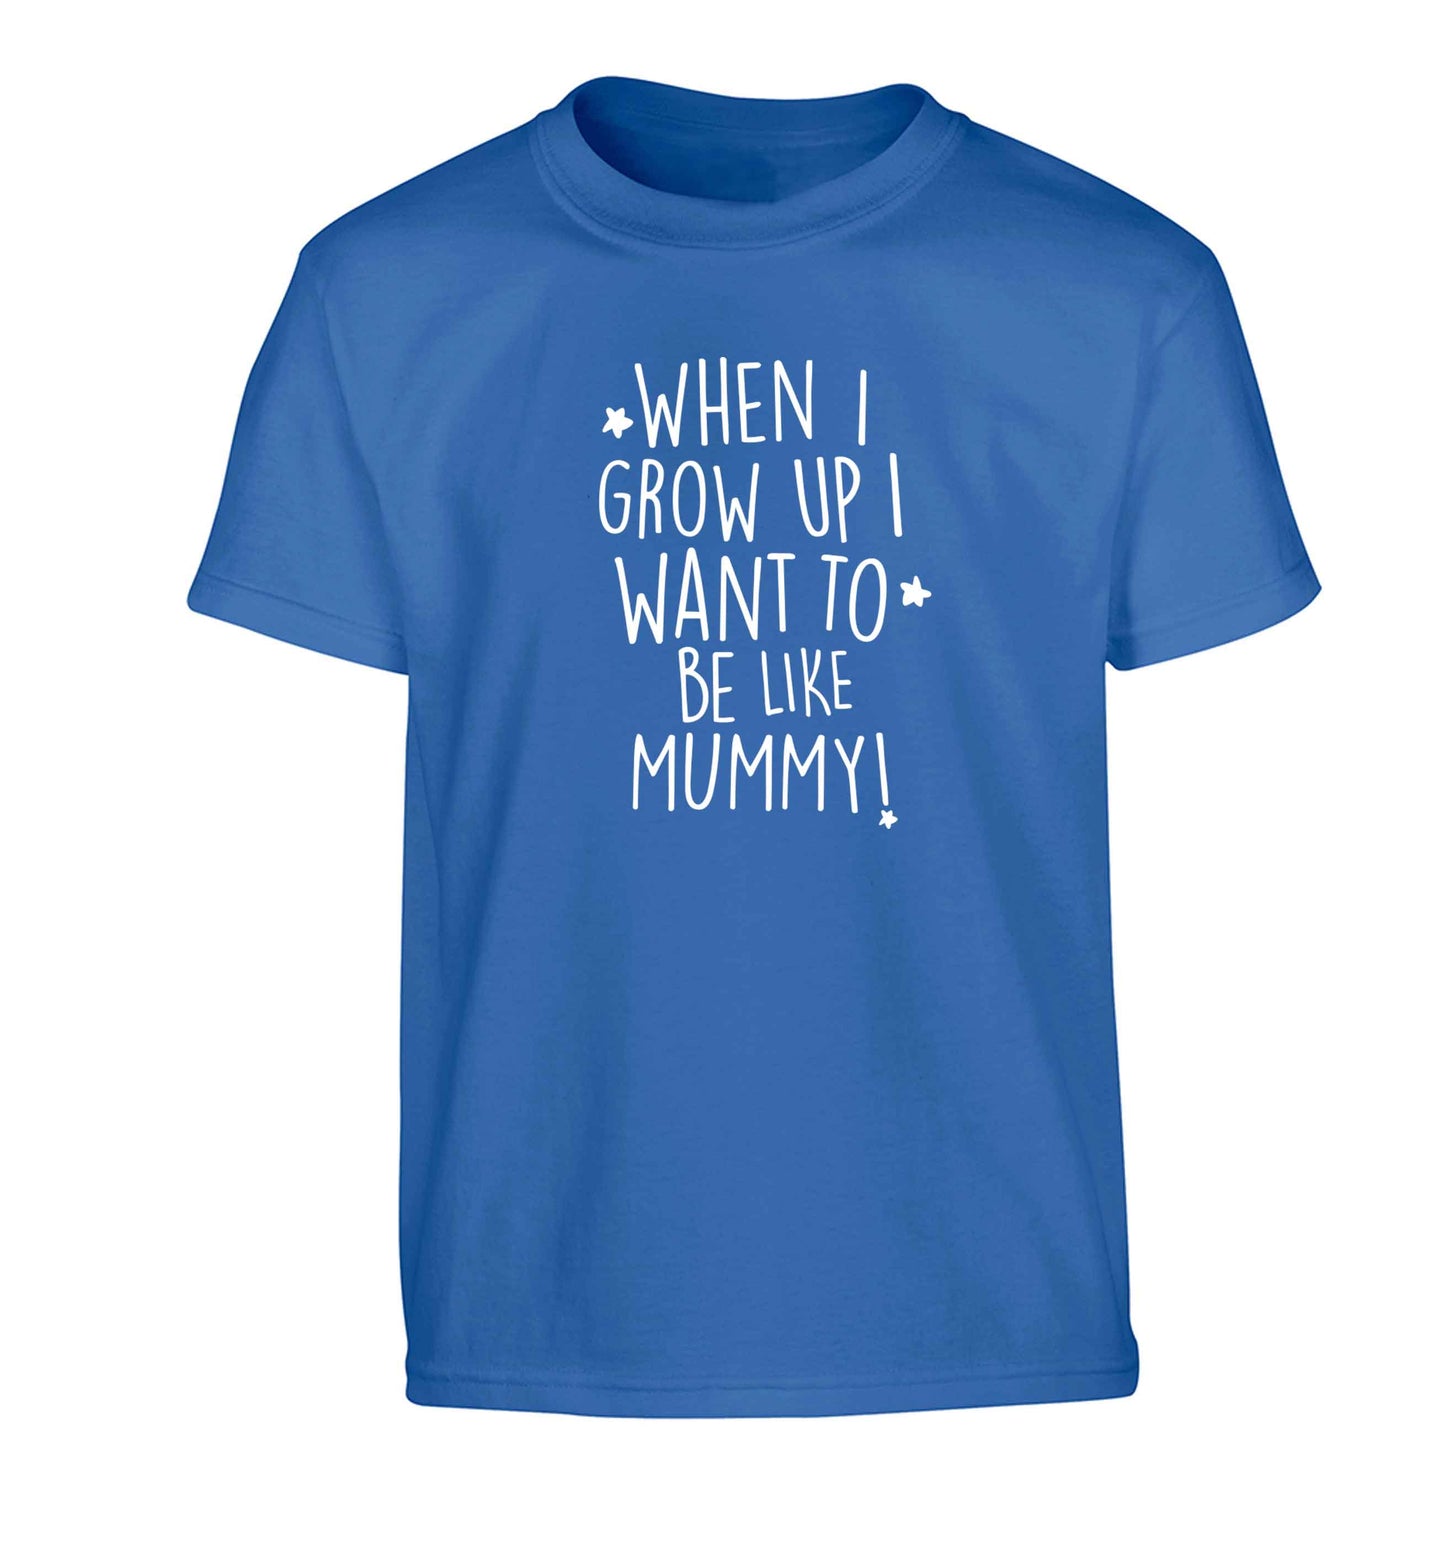 When I grow up I want to be like my mummy Children's blue Tshirt 12-13 Years